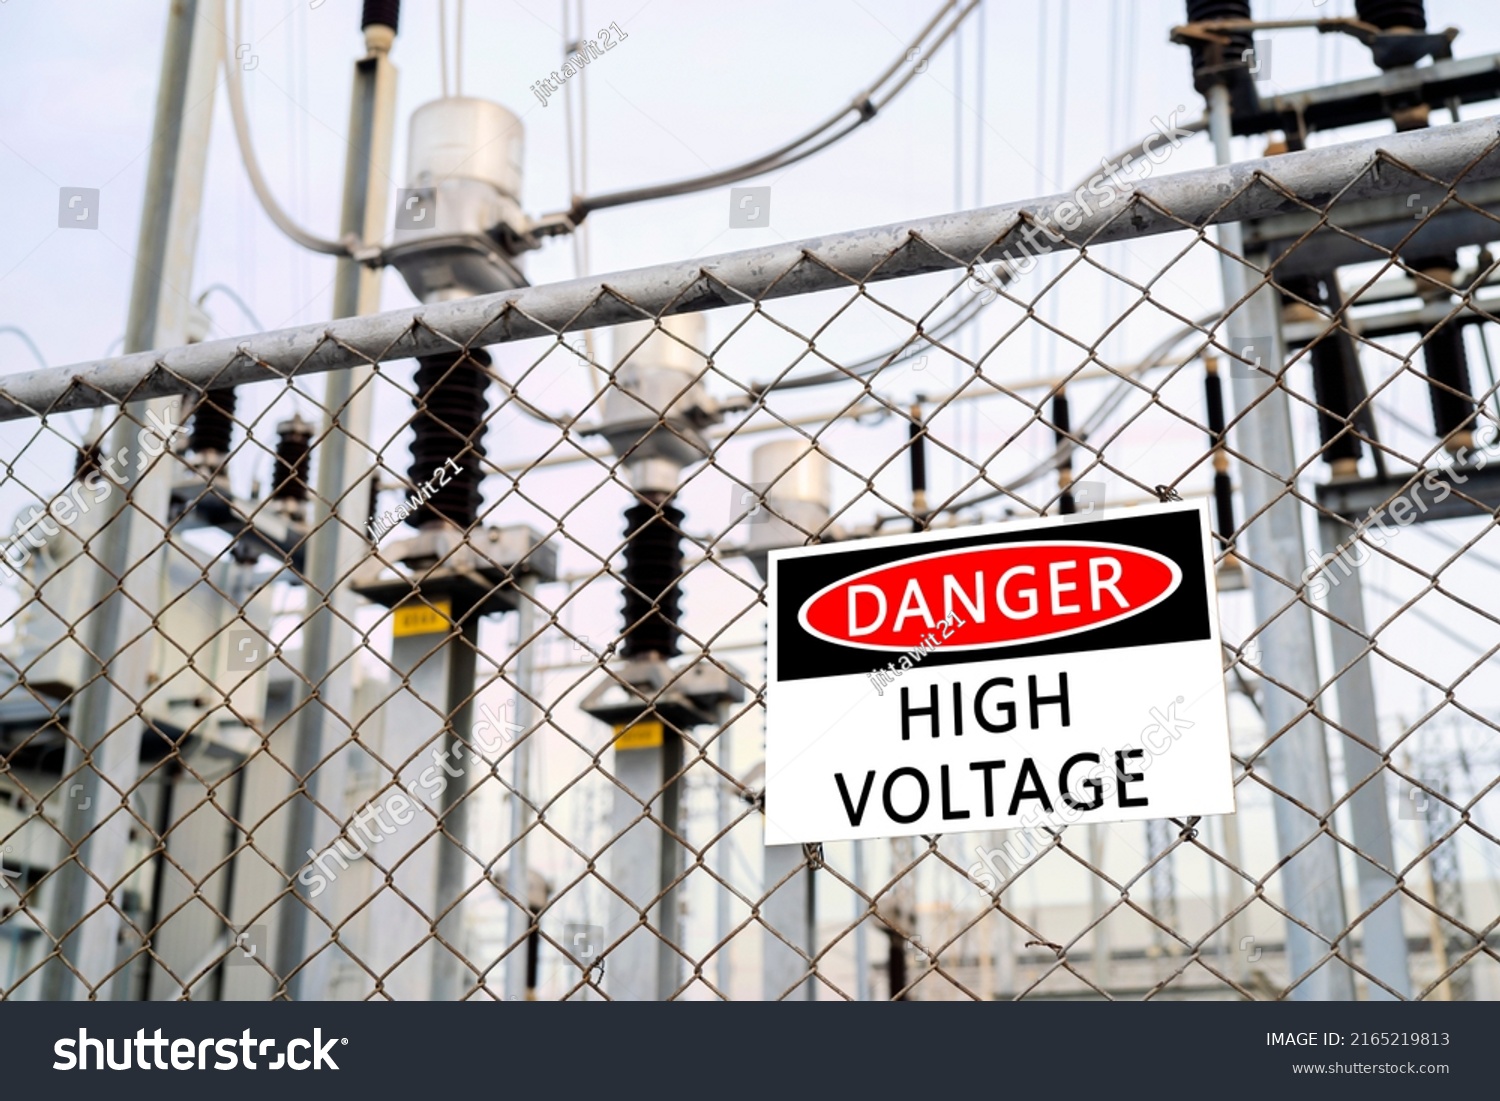 High-voltage transformer substation behind barbed-wire chain-link fence with Danger High Voltage sign. #2165219813